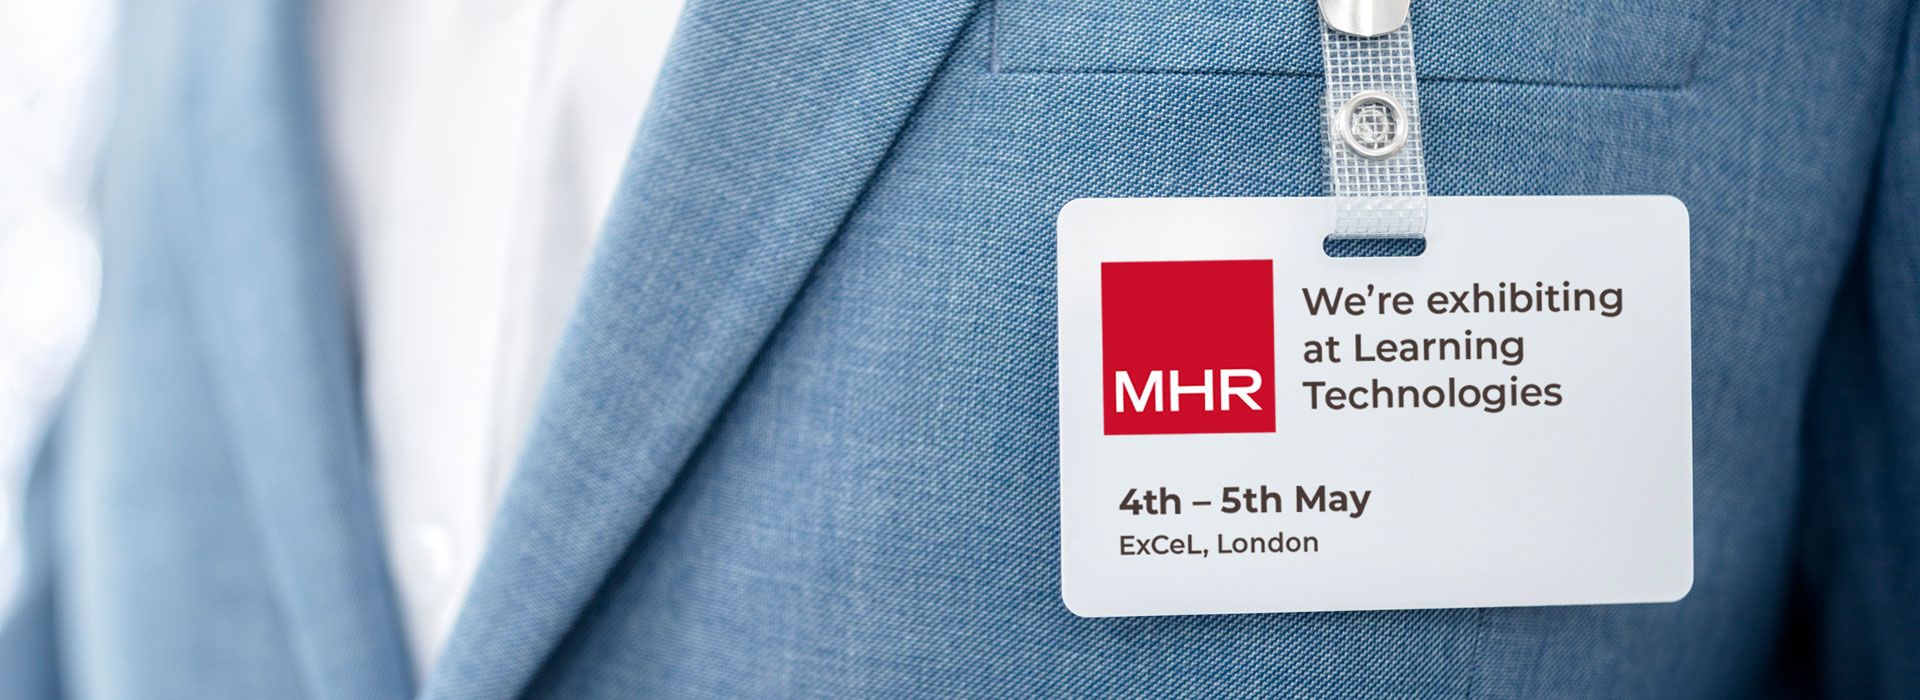 Build skills and reshape careers with MHR